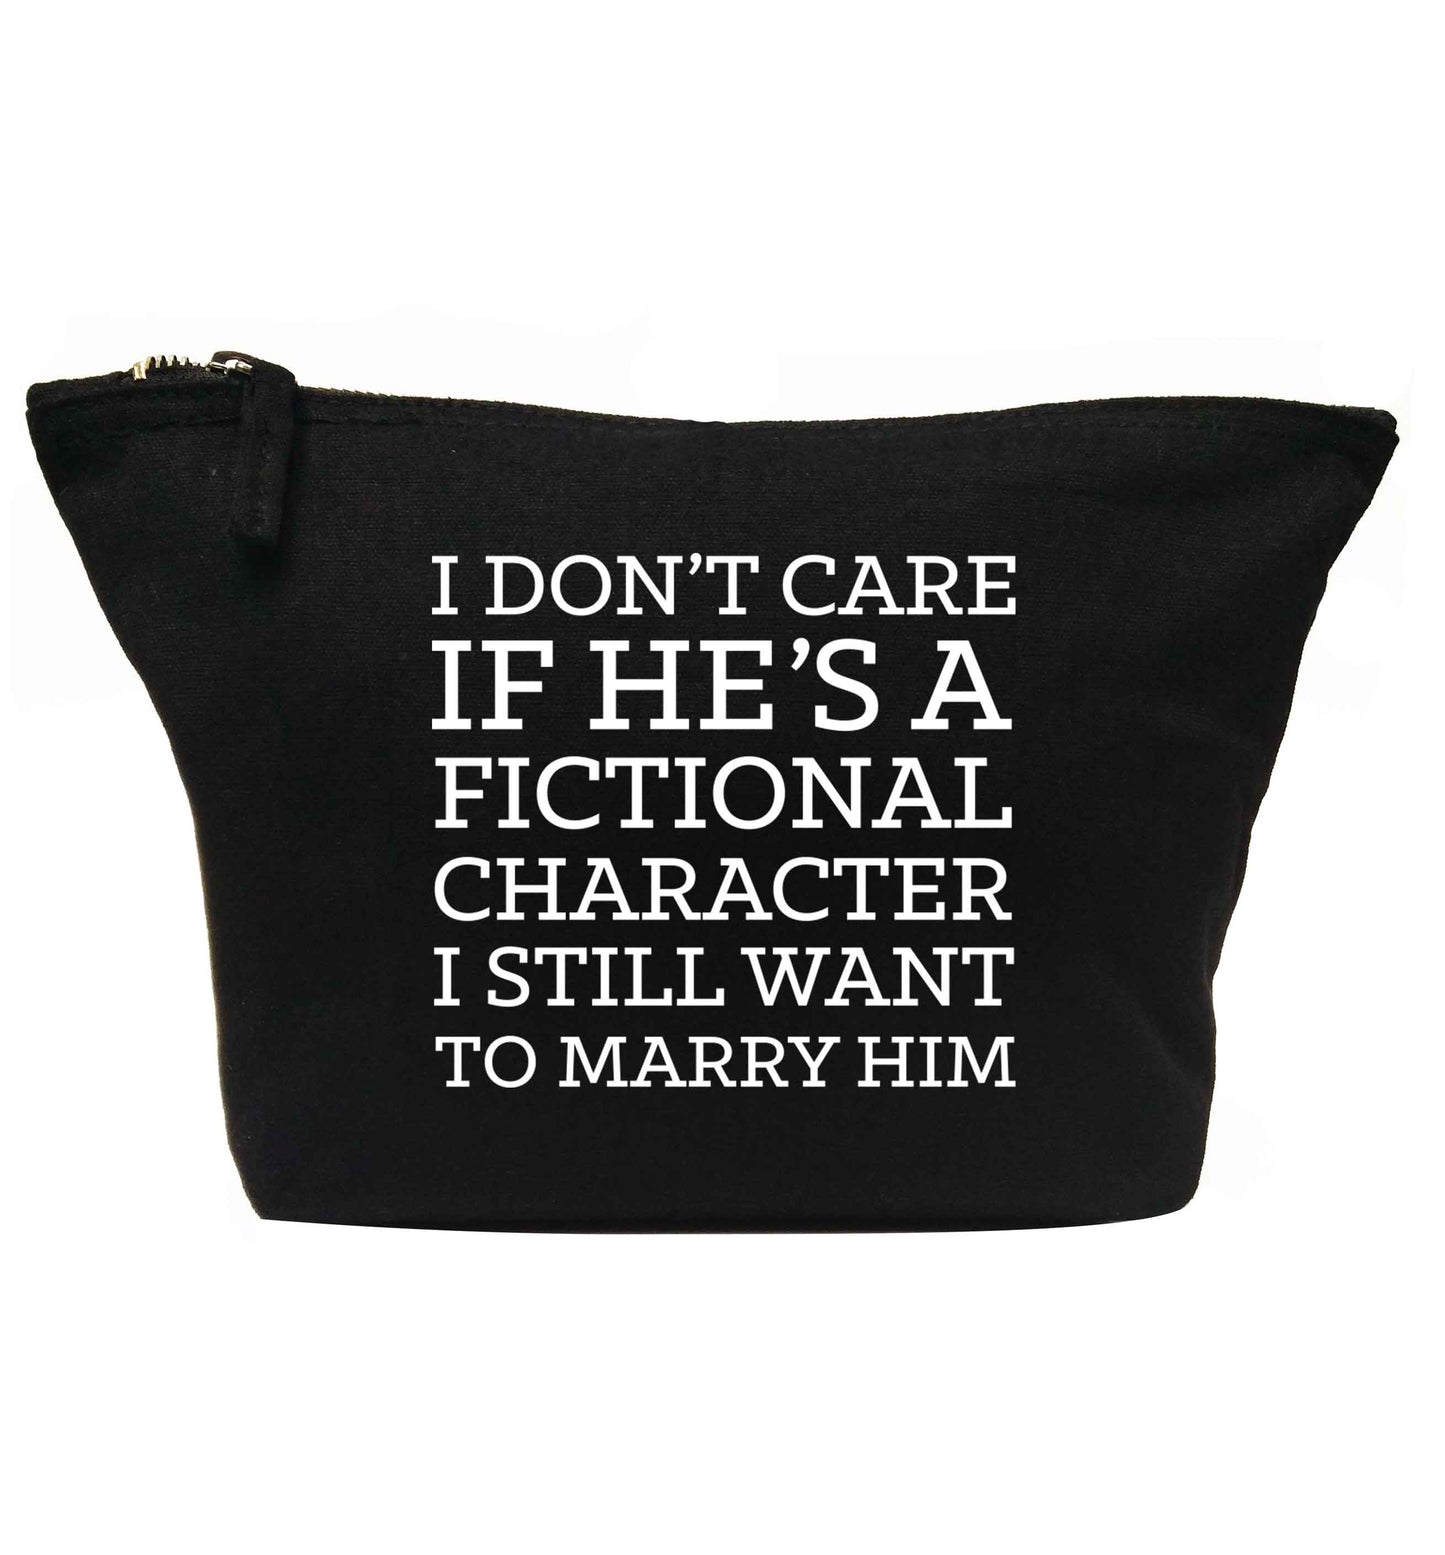 I don't care if he's a fictional character I still want to marry him | Makeup / wash bag